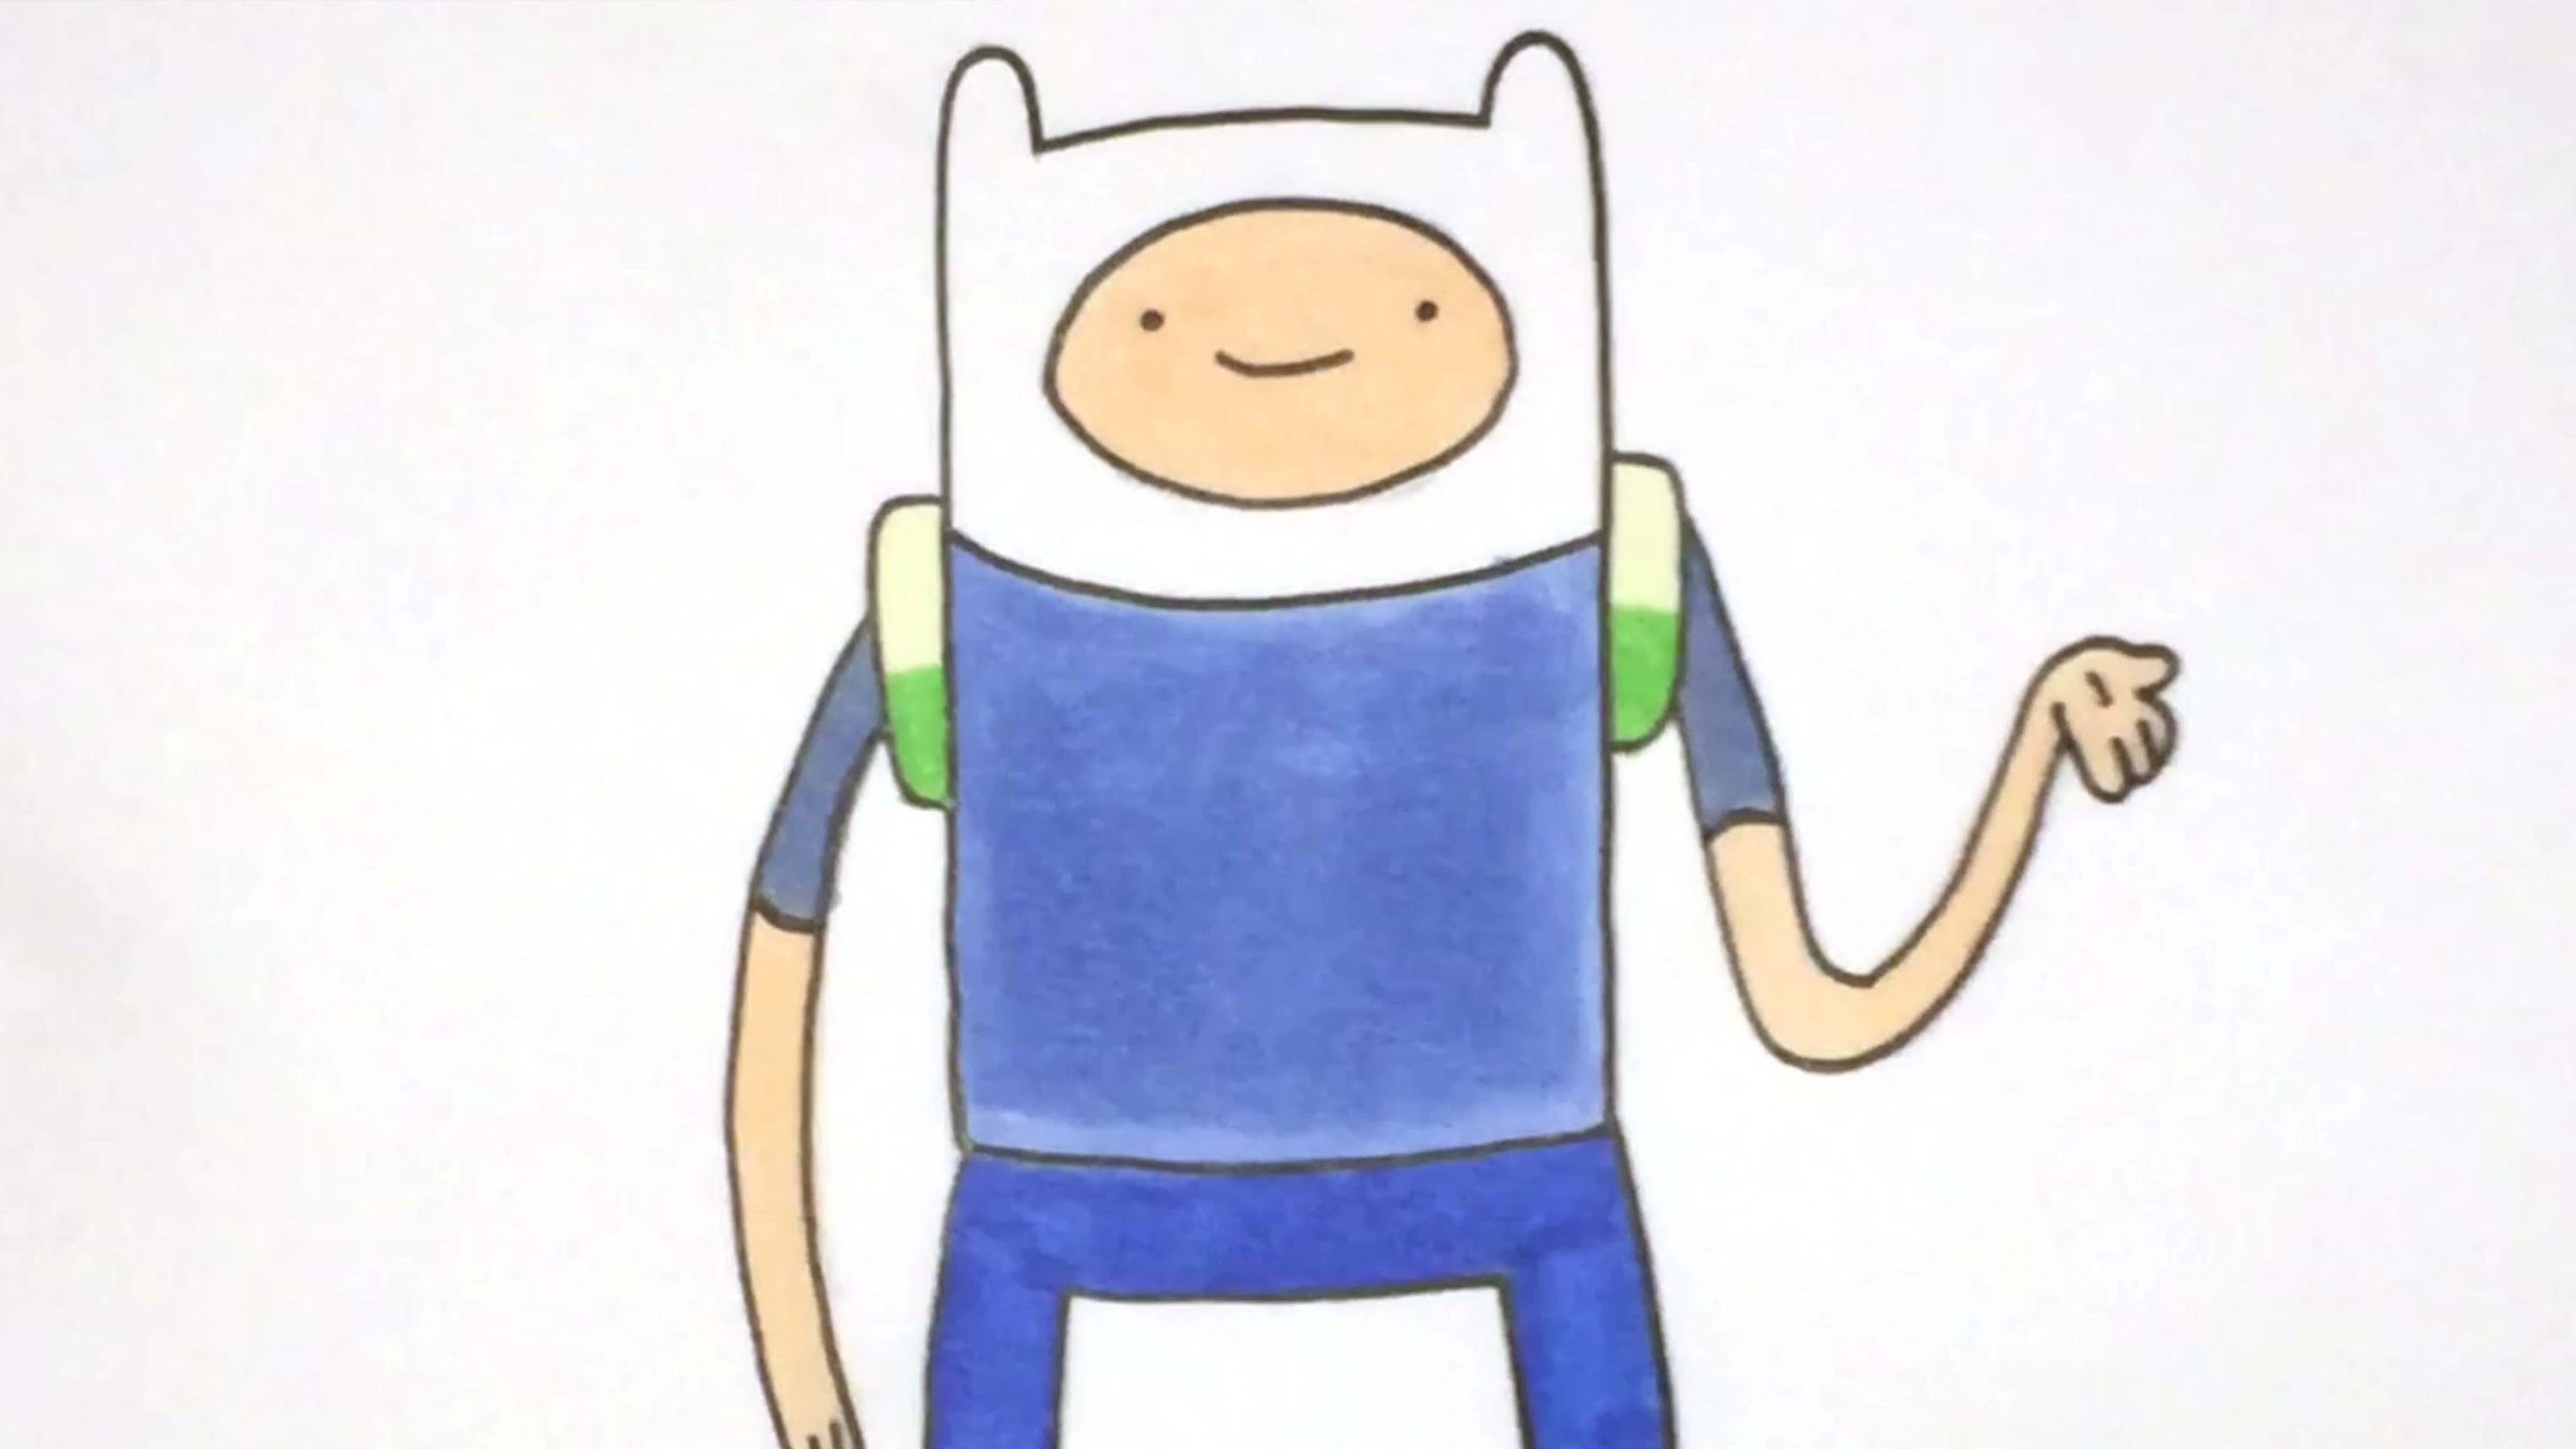 Tutorial - How to draw Finn Adventure Time drawing tutorial.